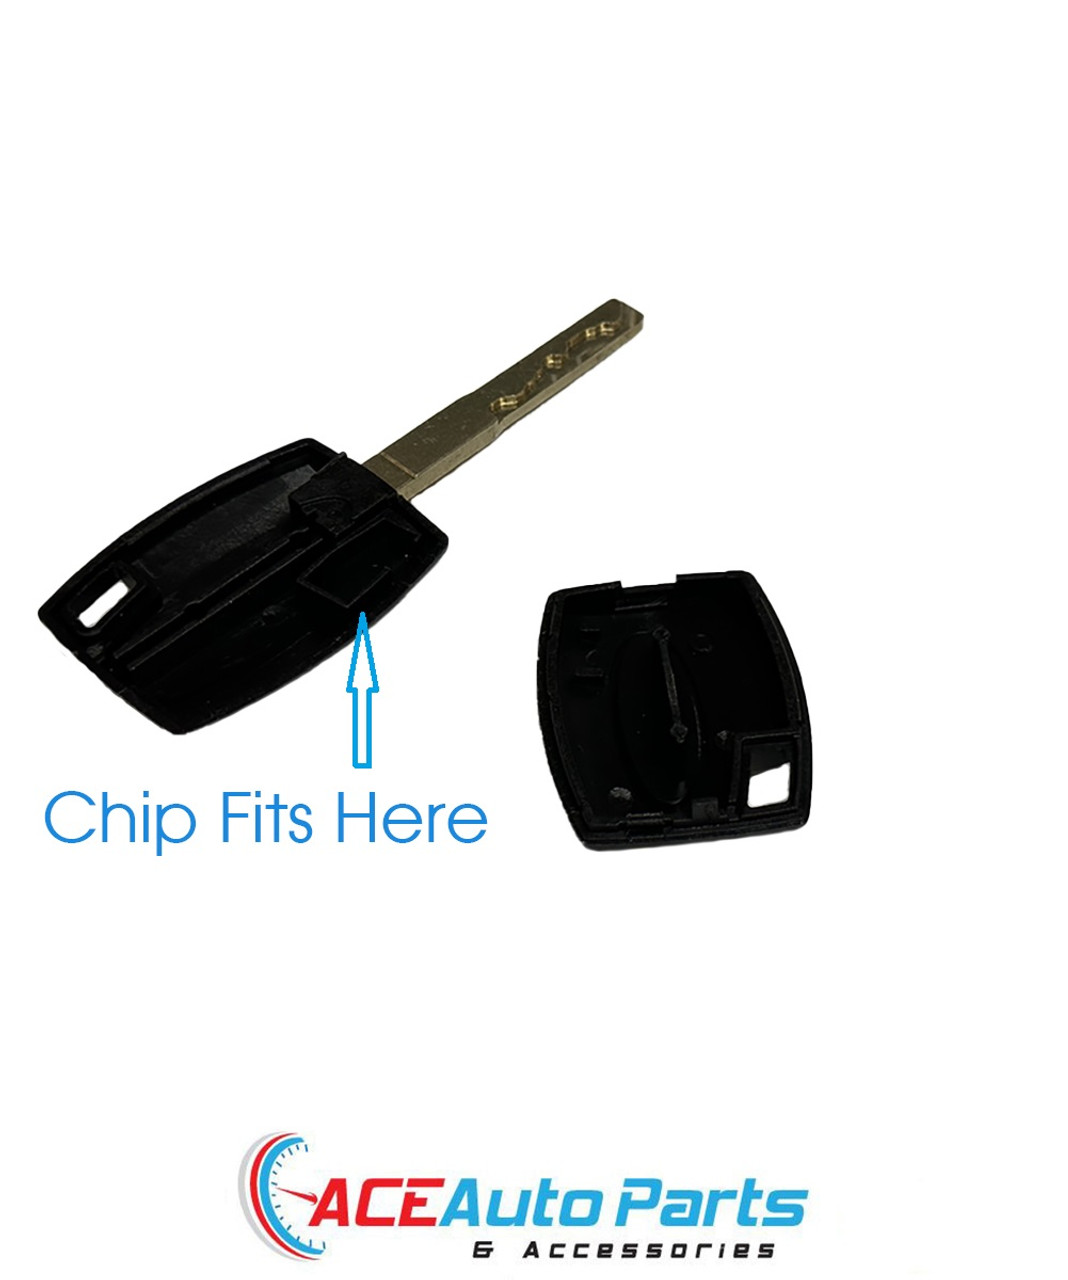 Ignition Barrel + Keys with chips for Ford Falcon BF - refer image